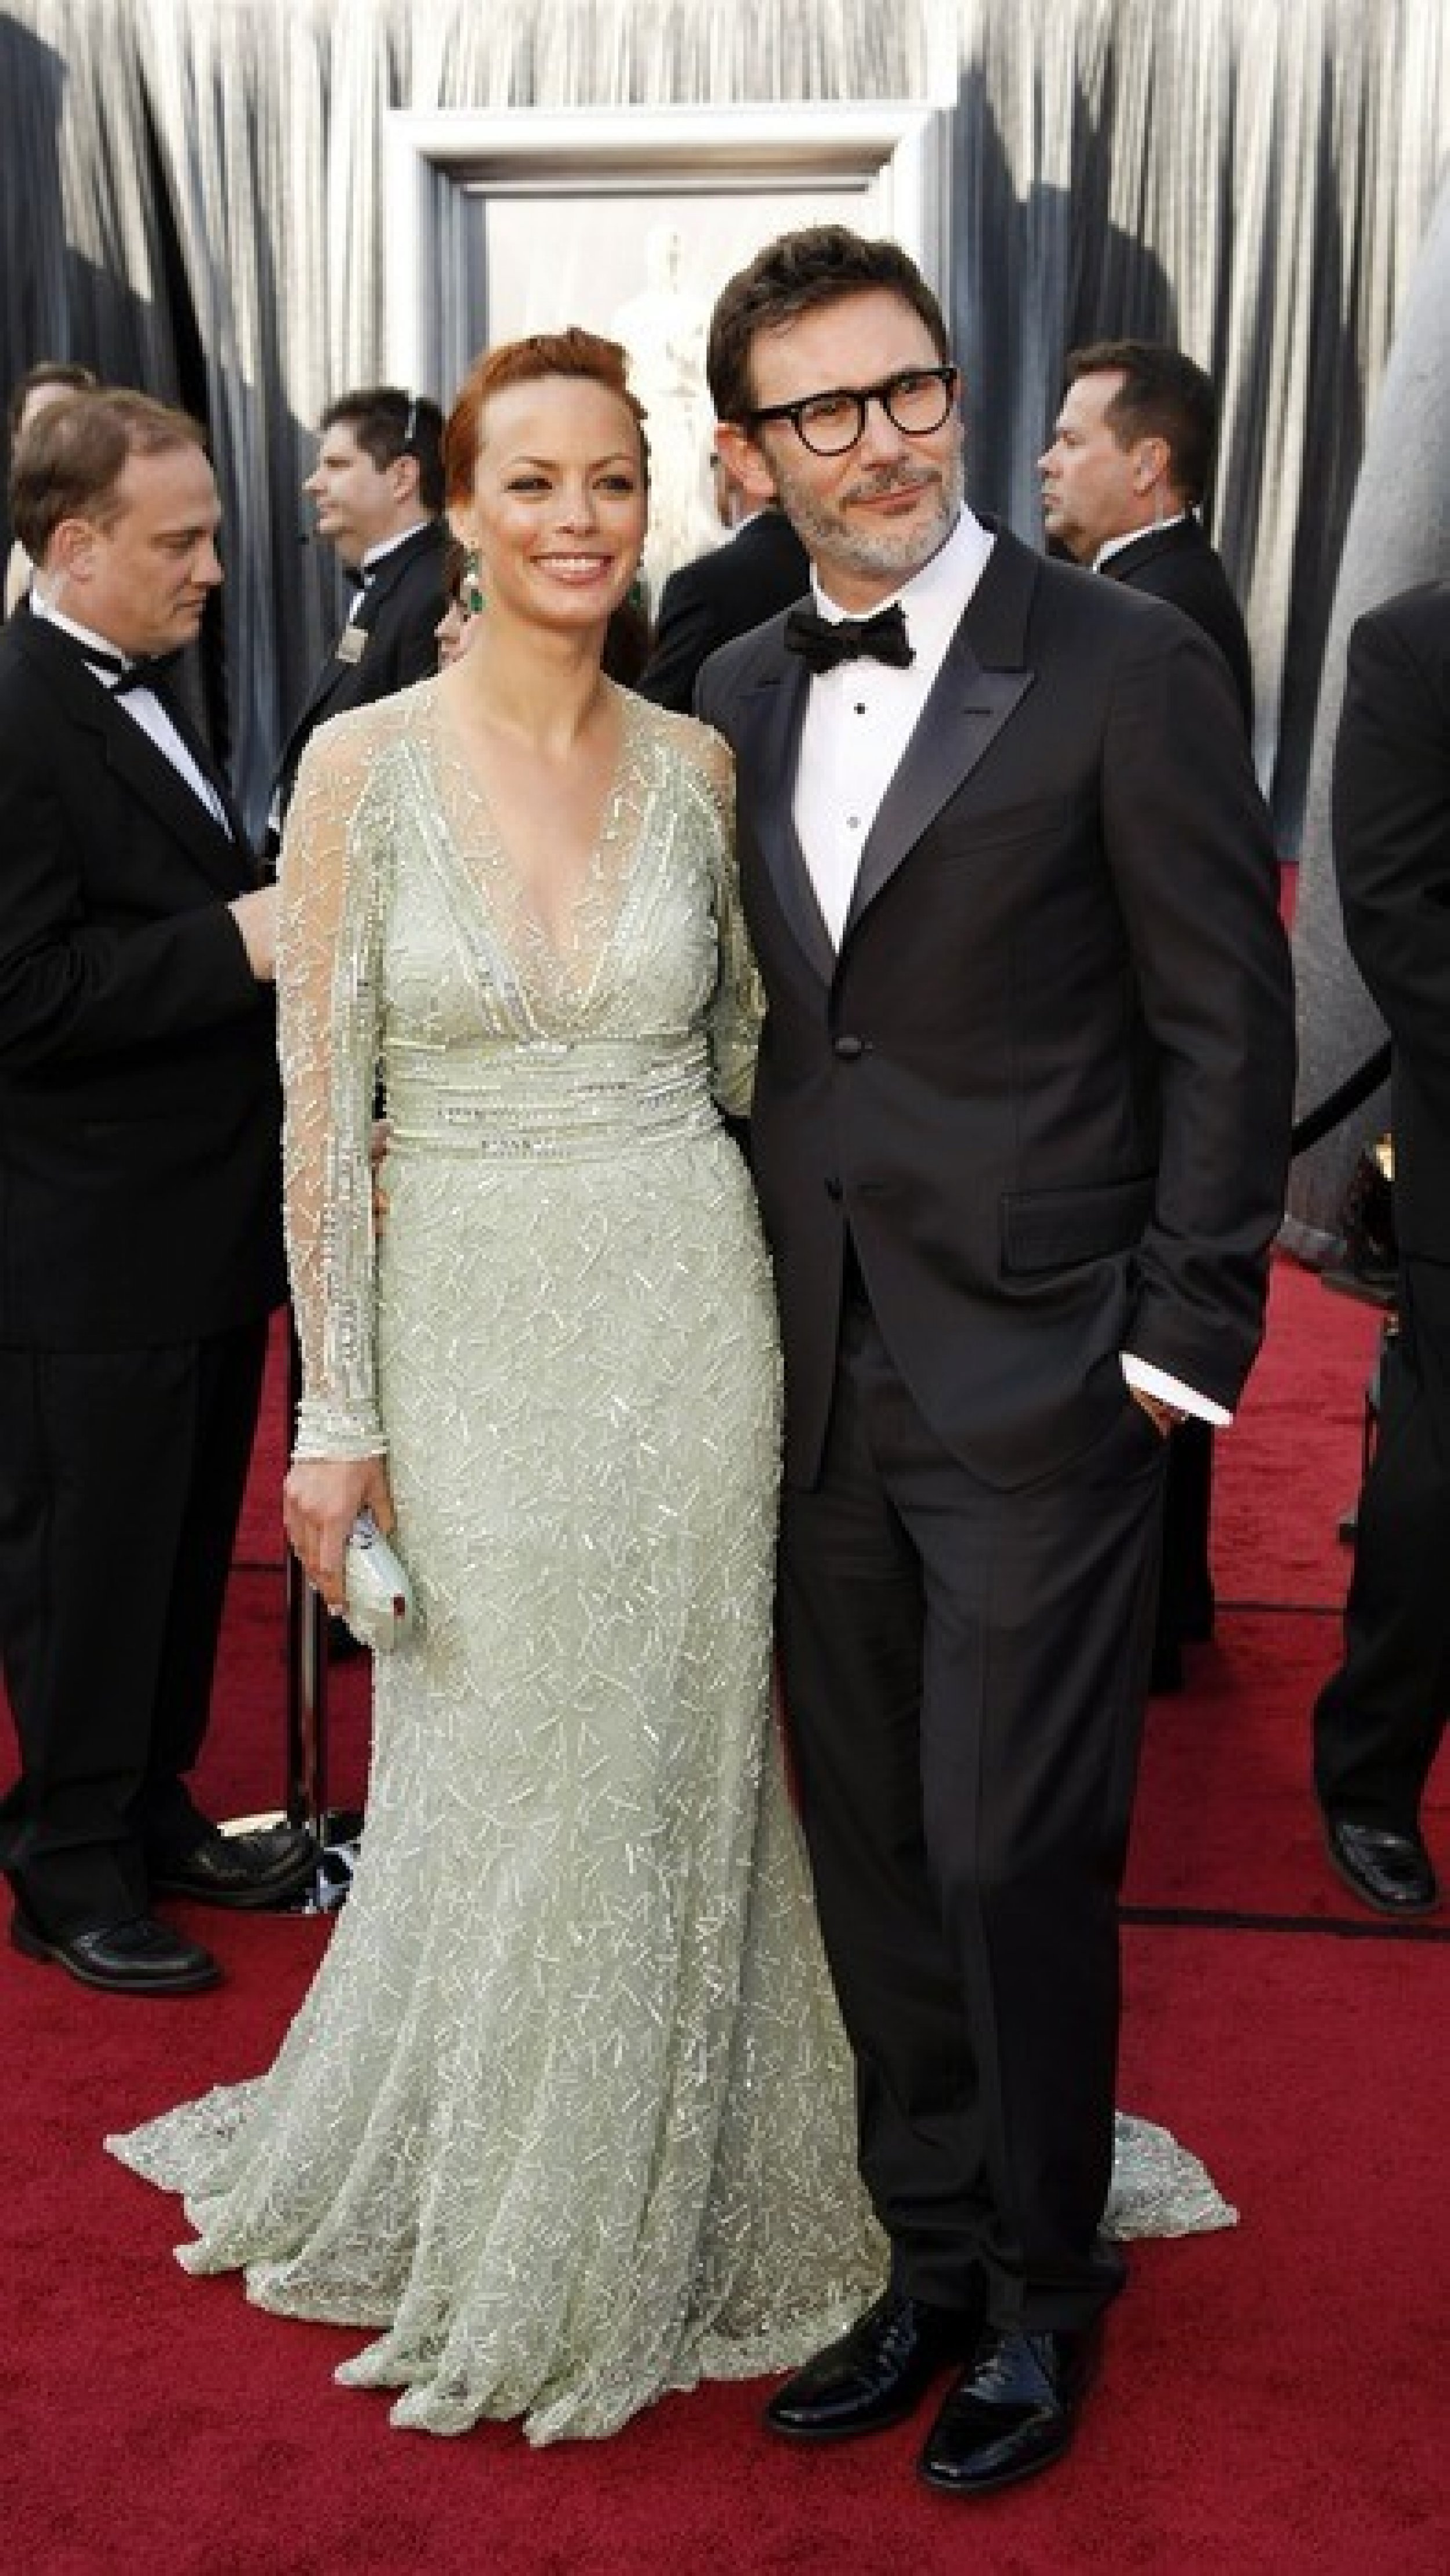 Berenice Bejo and Michel Hazanavicius arrive at the 84th Academy Awards.